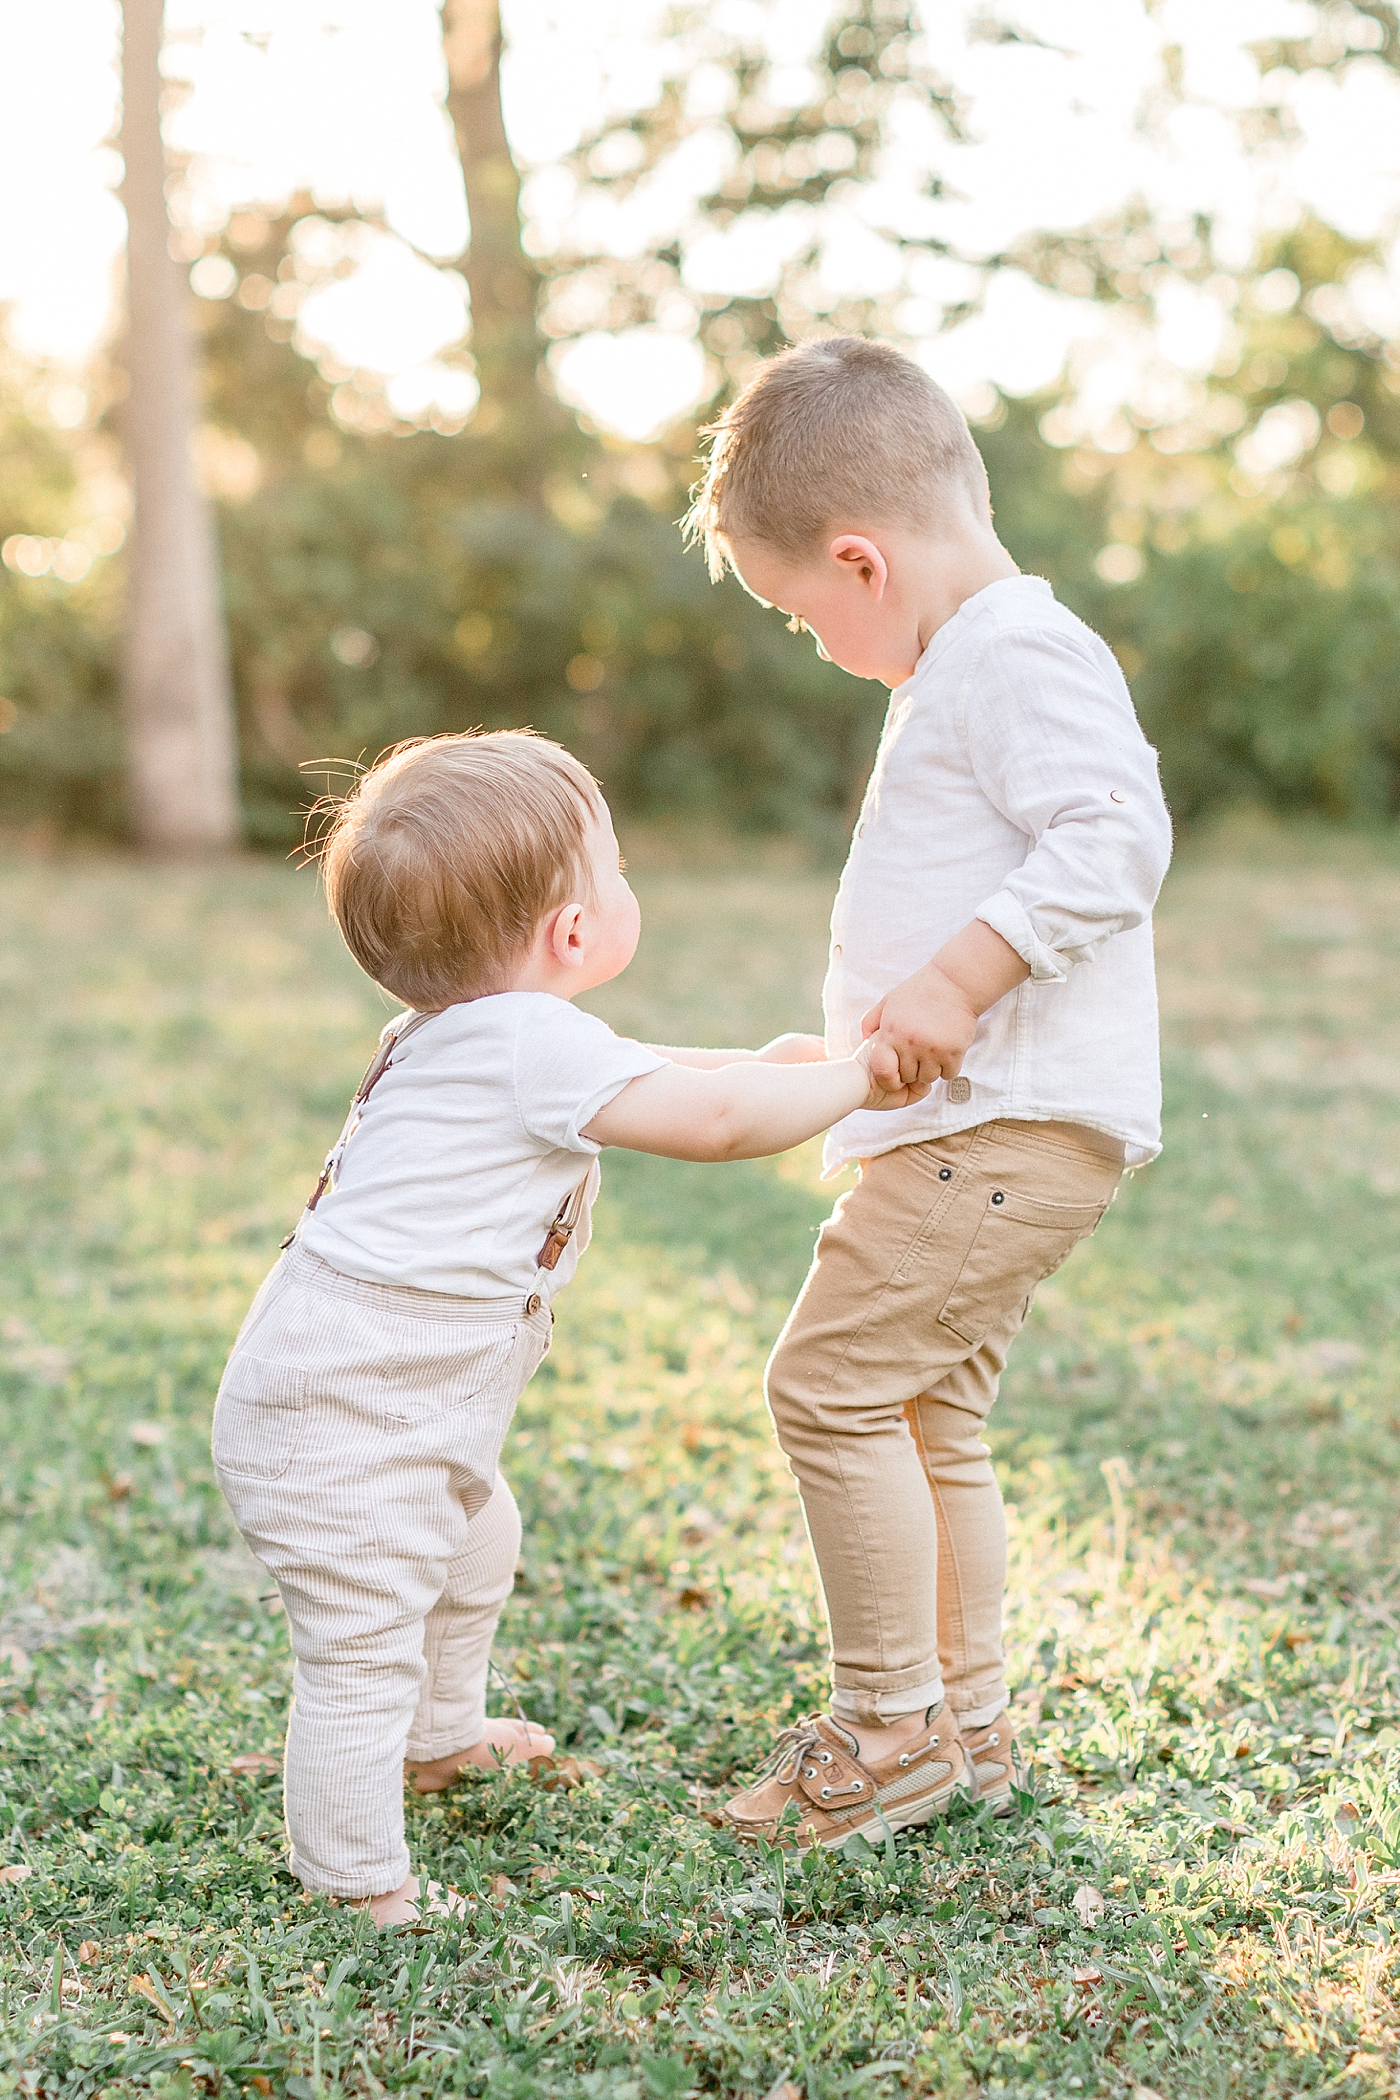 Brothers holding hands and playing in the field. Photo by Brittany Elise Photography.